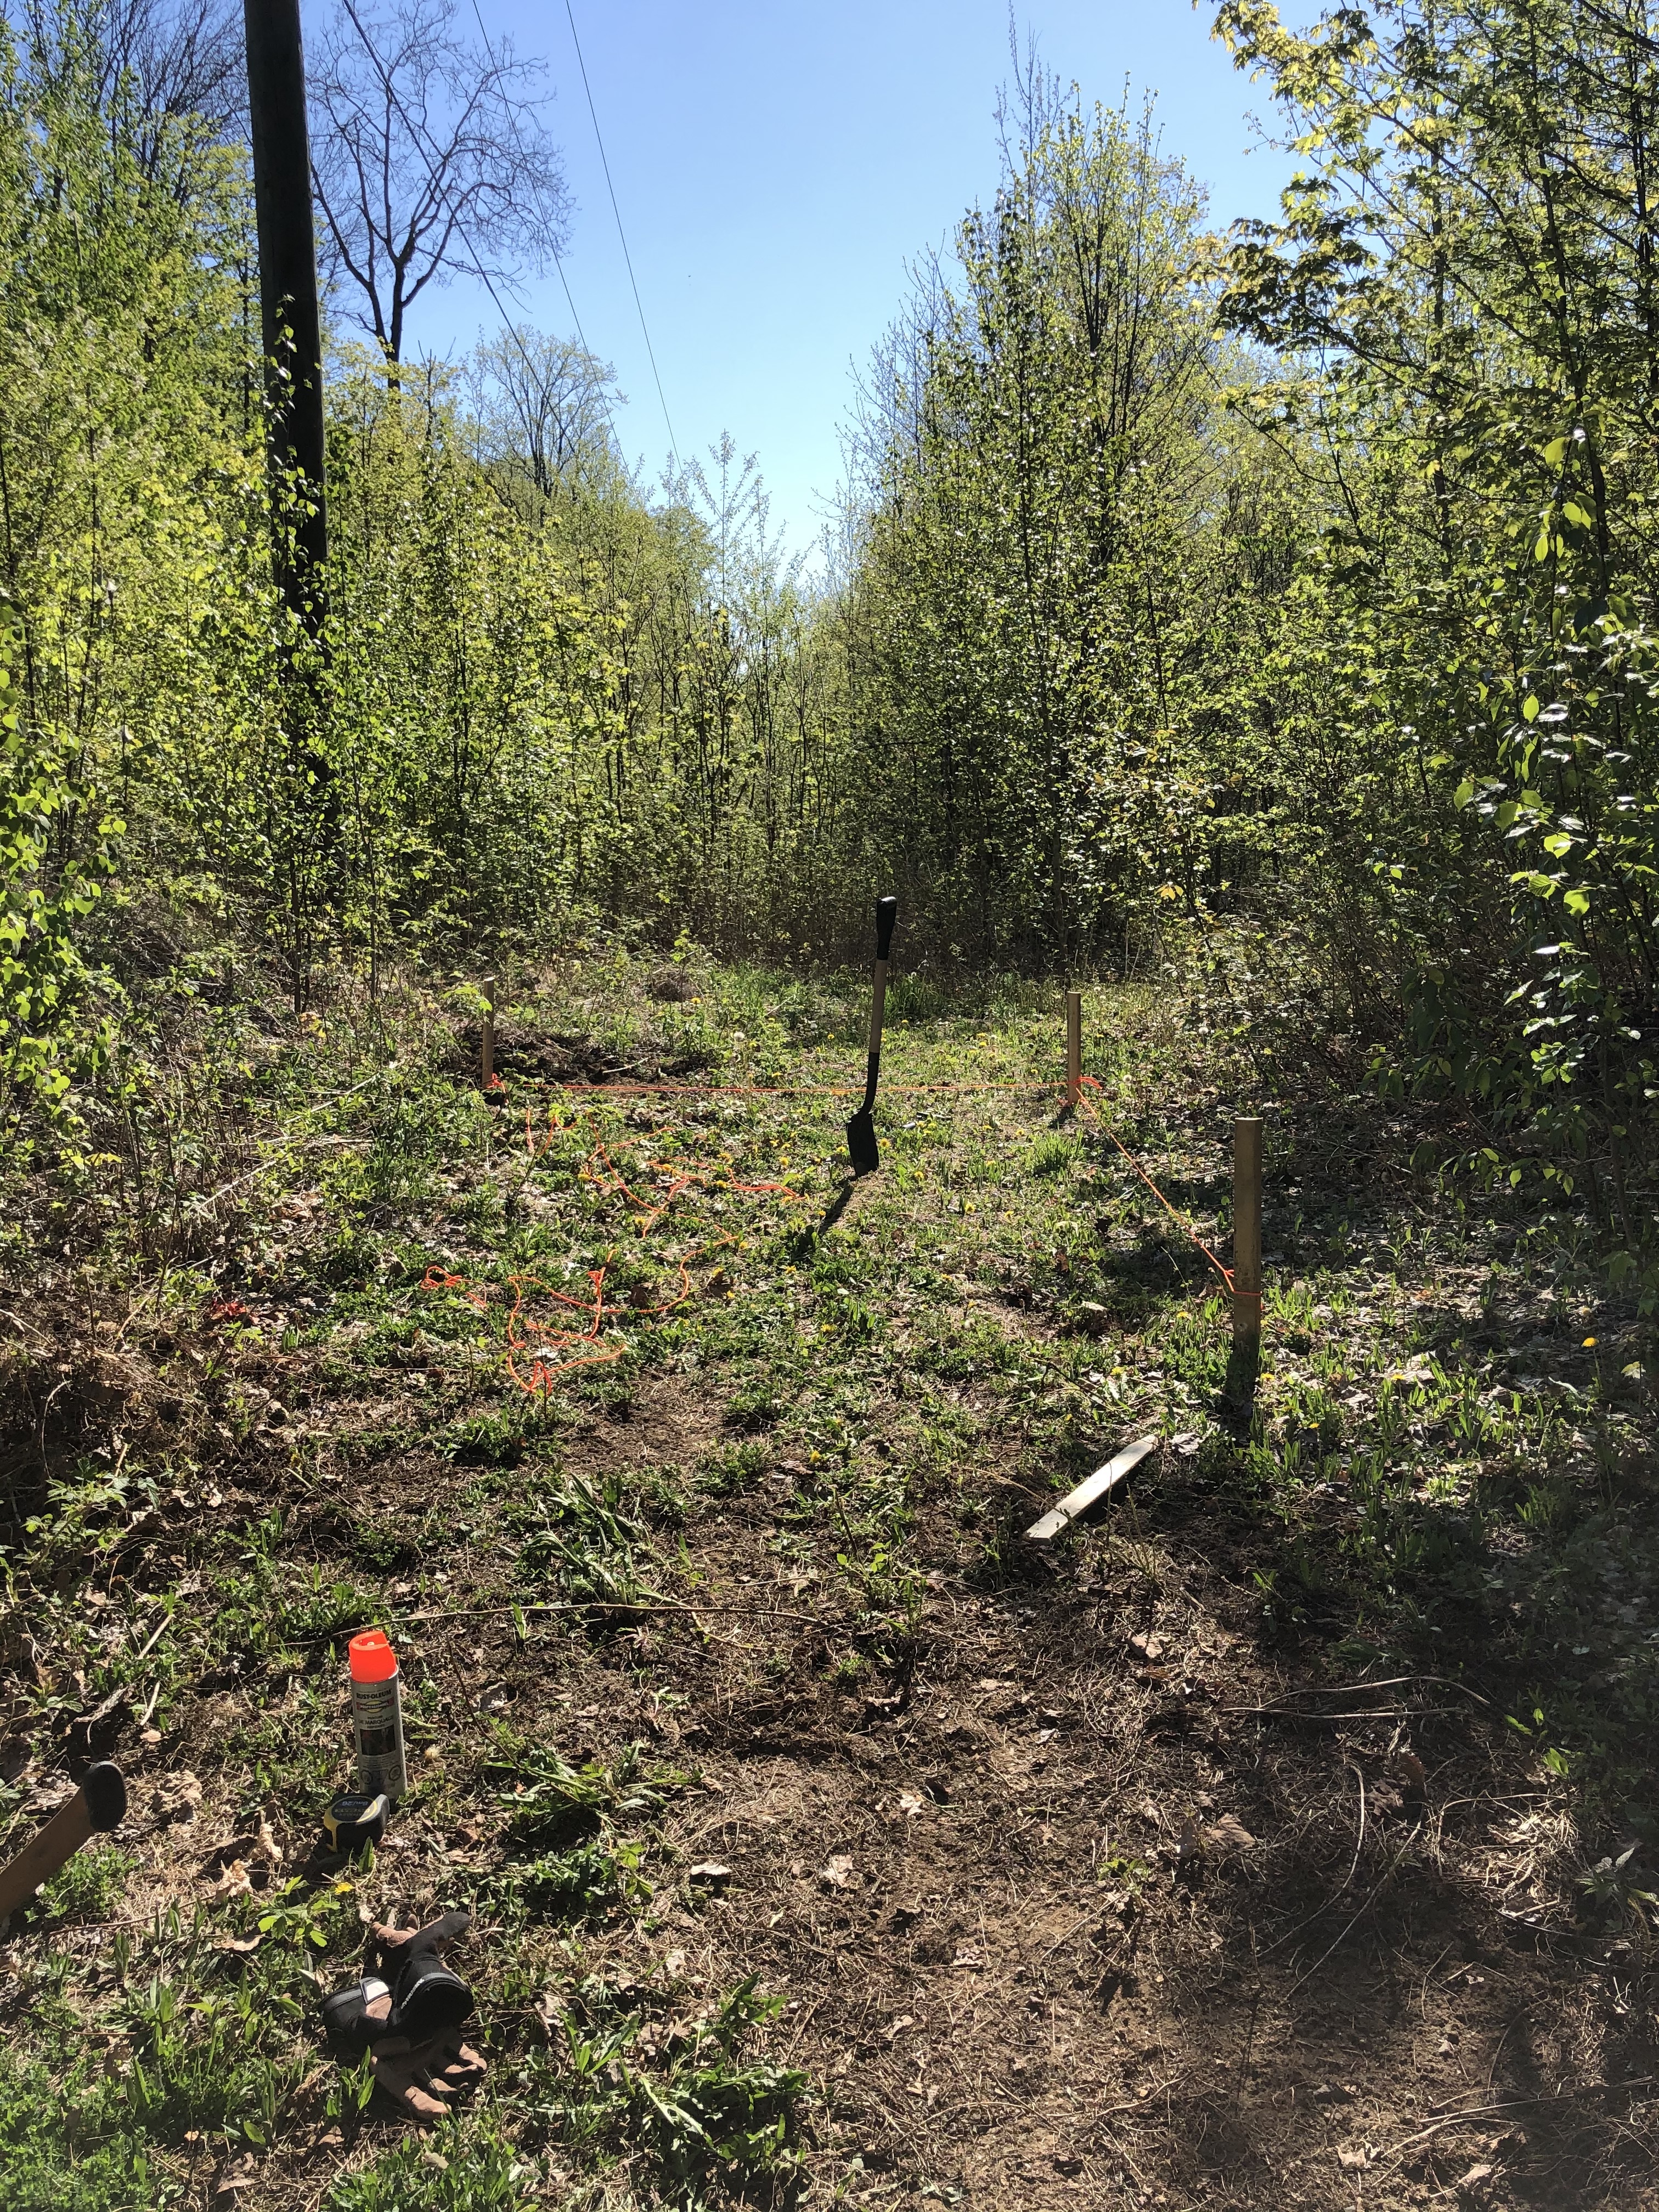 Some stakes and string on a somewhat clear plot of land, outlining the ideal container position. A pick axe is ready to start putting some grave and cinderblocks in on the corners.